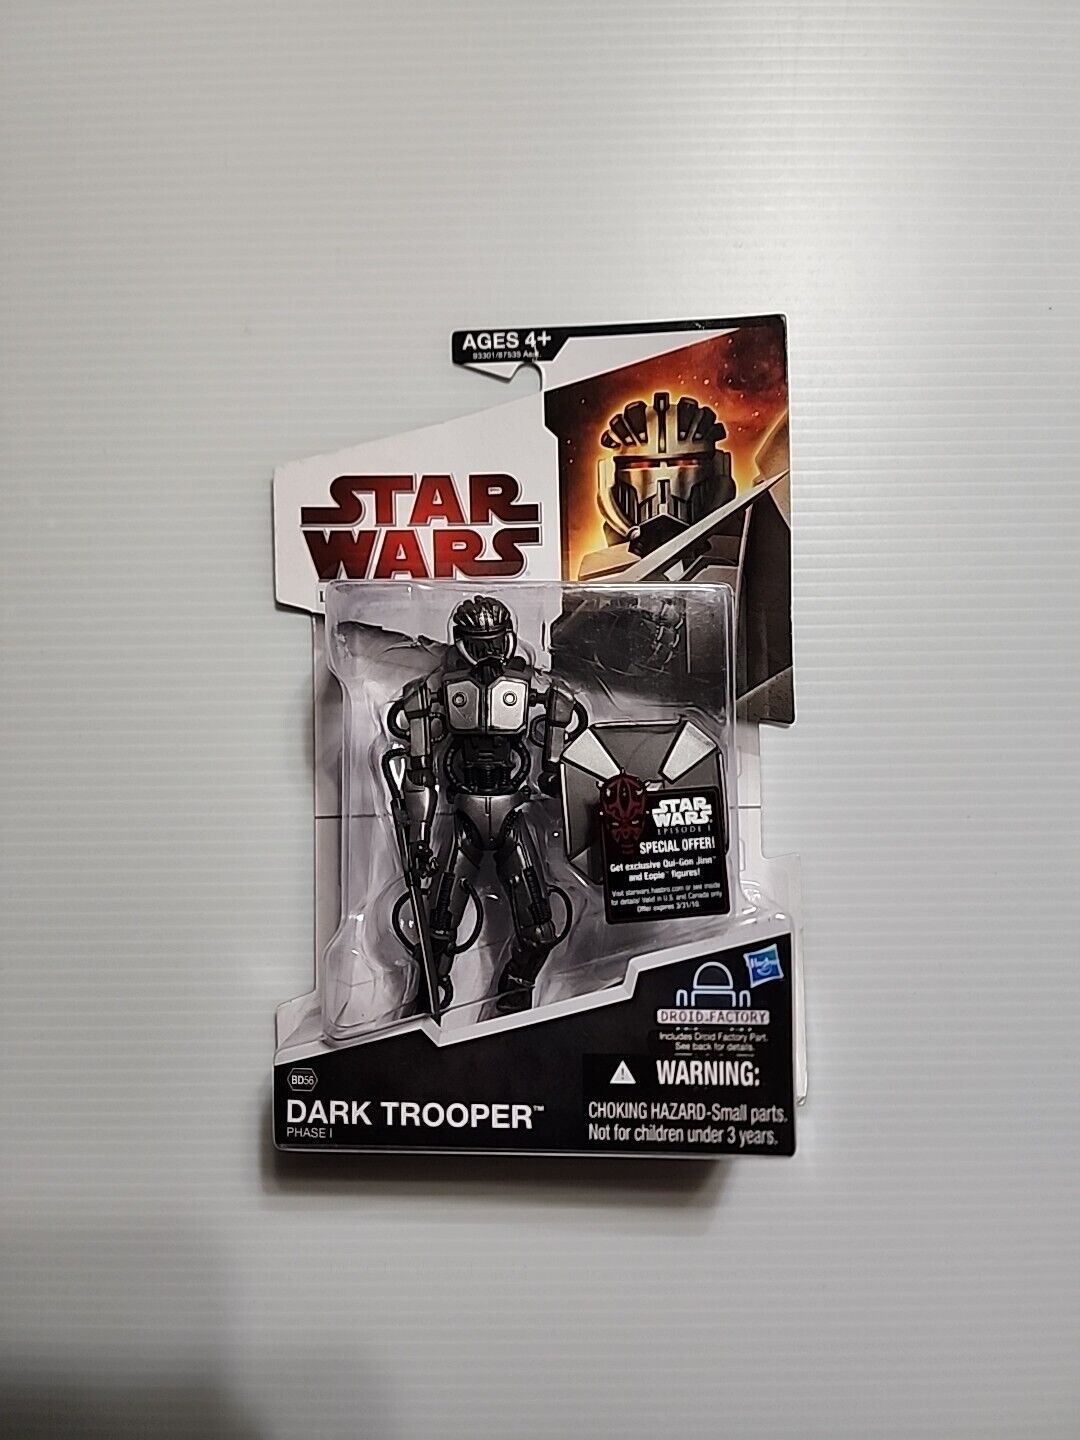   Star Wars Legacy Collection Dark Trooper BD56 Figure 3.75" Phase 1.  2009